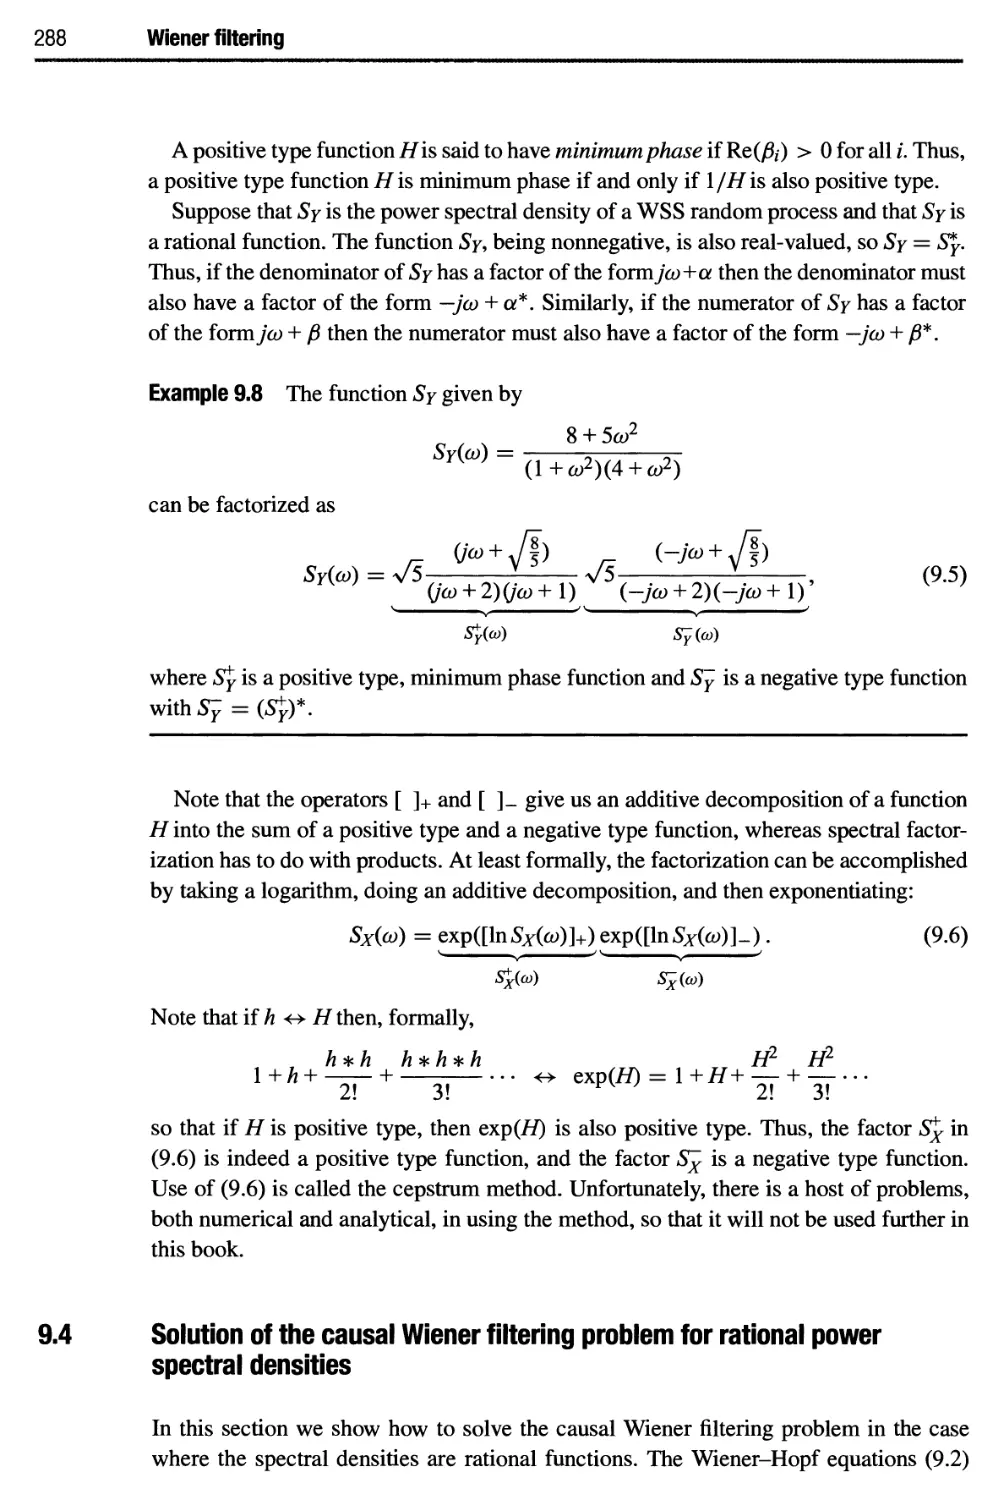 9.4 Solution of the causal Wiener filtering problem for rational power spectral densities 288